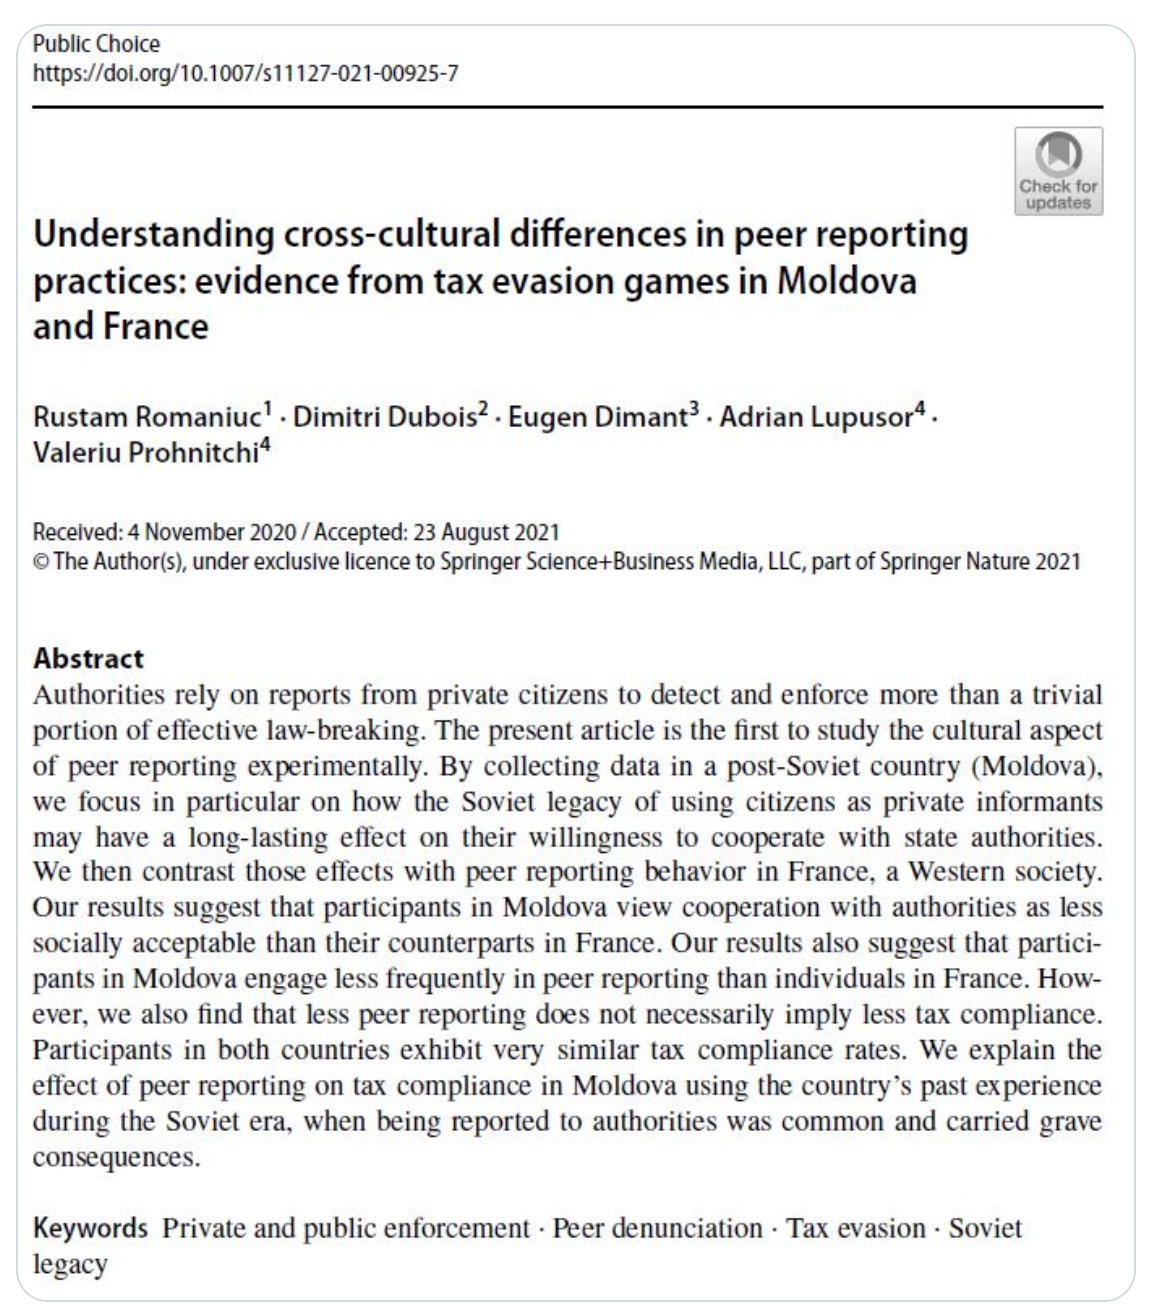 Understanding cross-cultural differences in peer reporting practices: evidence from tax evasion games in Moldova and France